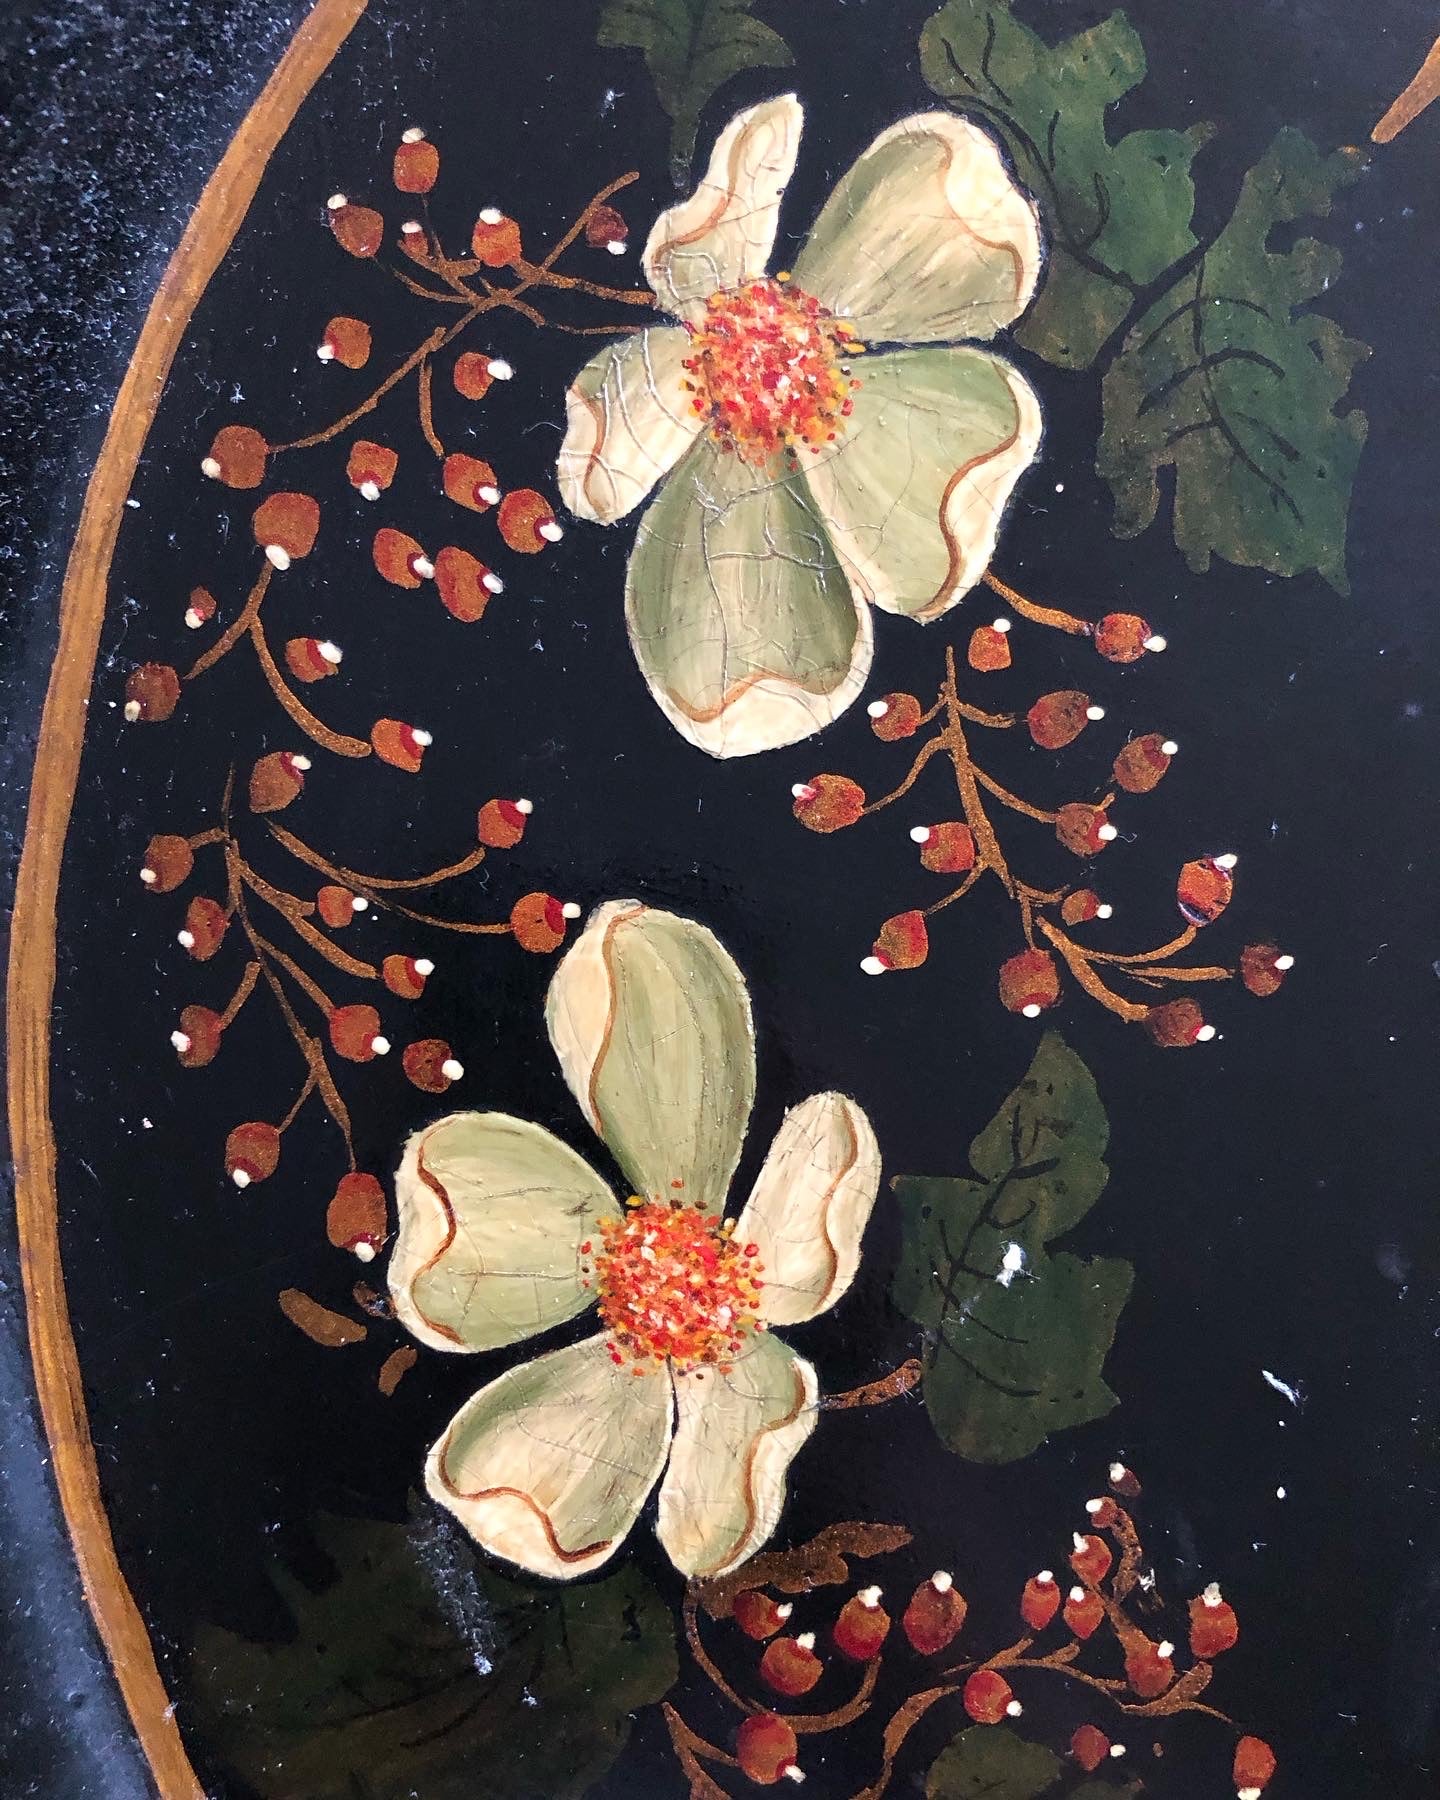 vintage hand-painted floral black enamel toleware tray - local pickup or delivery only